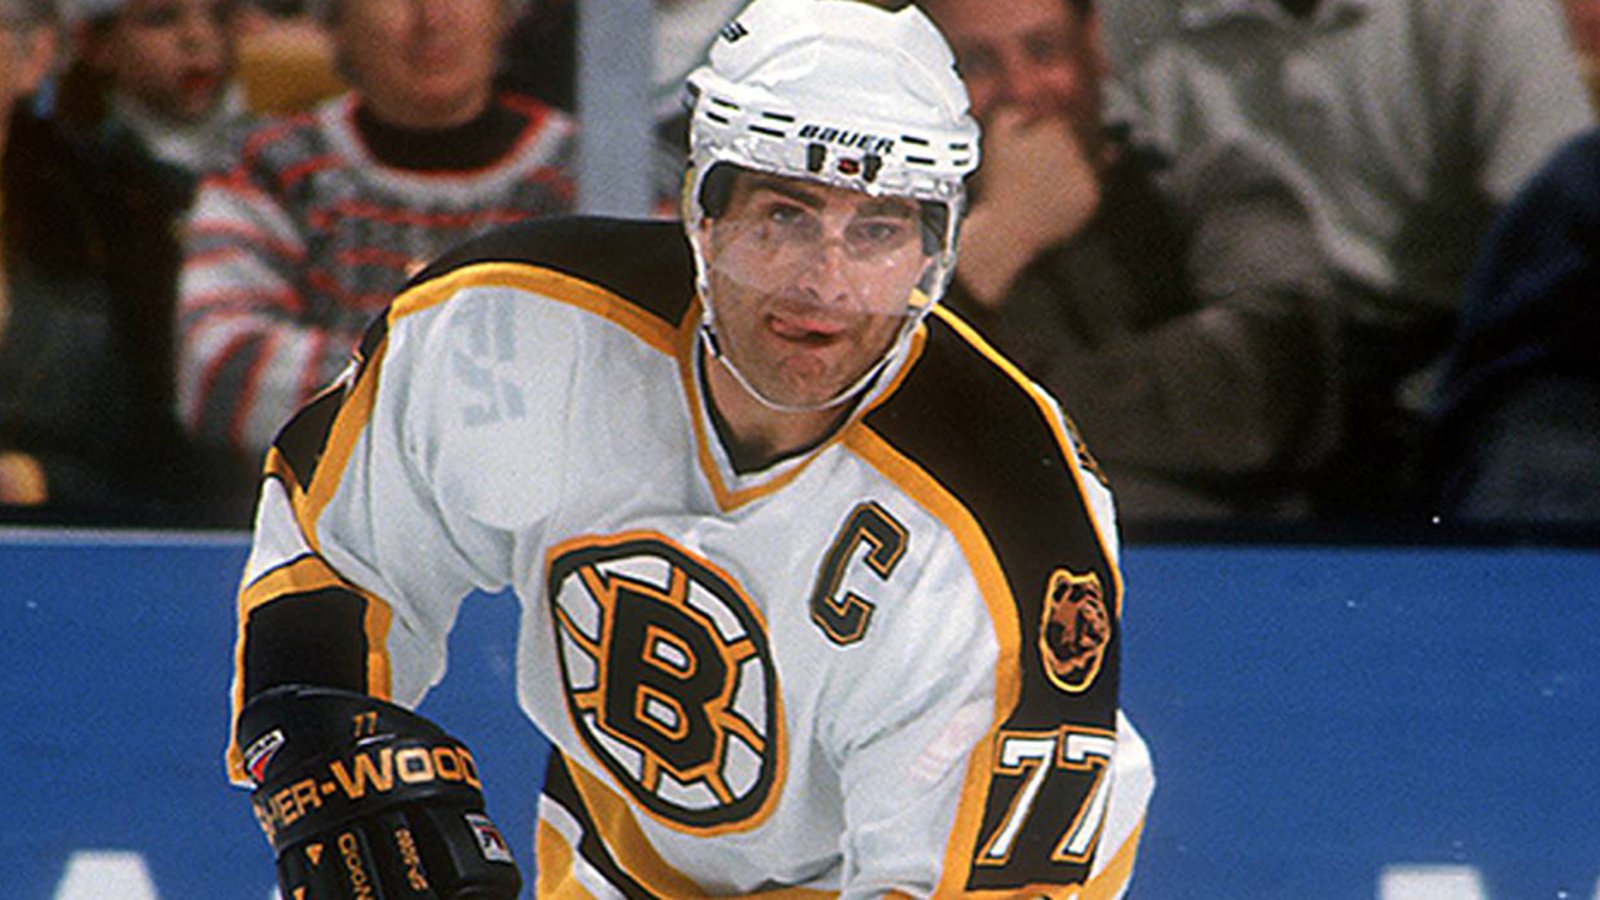 The Avalanche should not have retired Ray Bourque's number